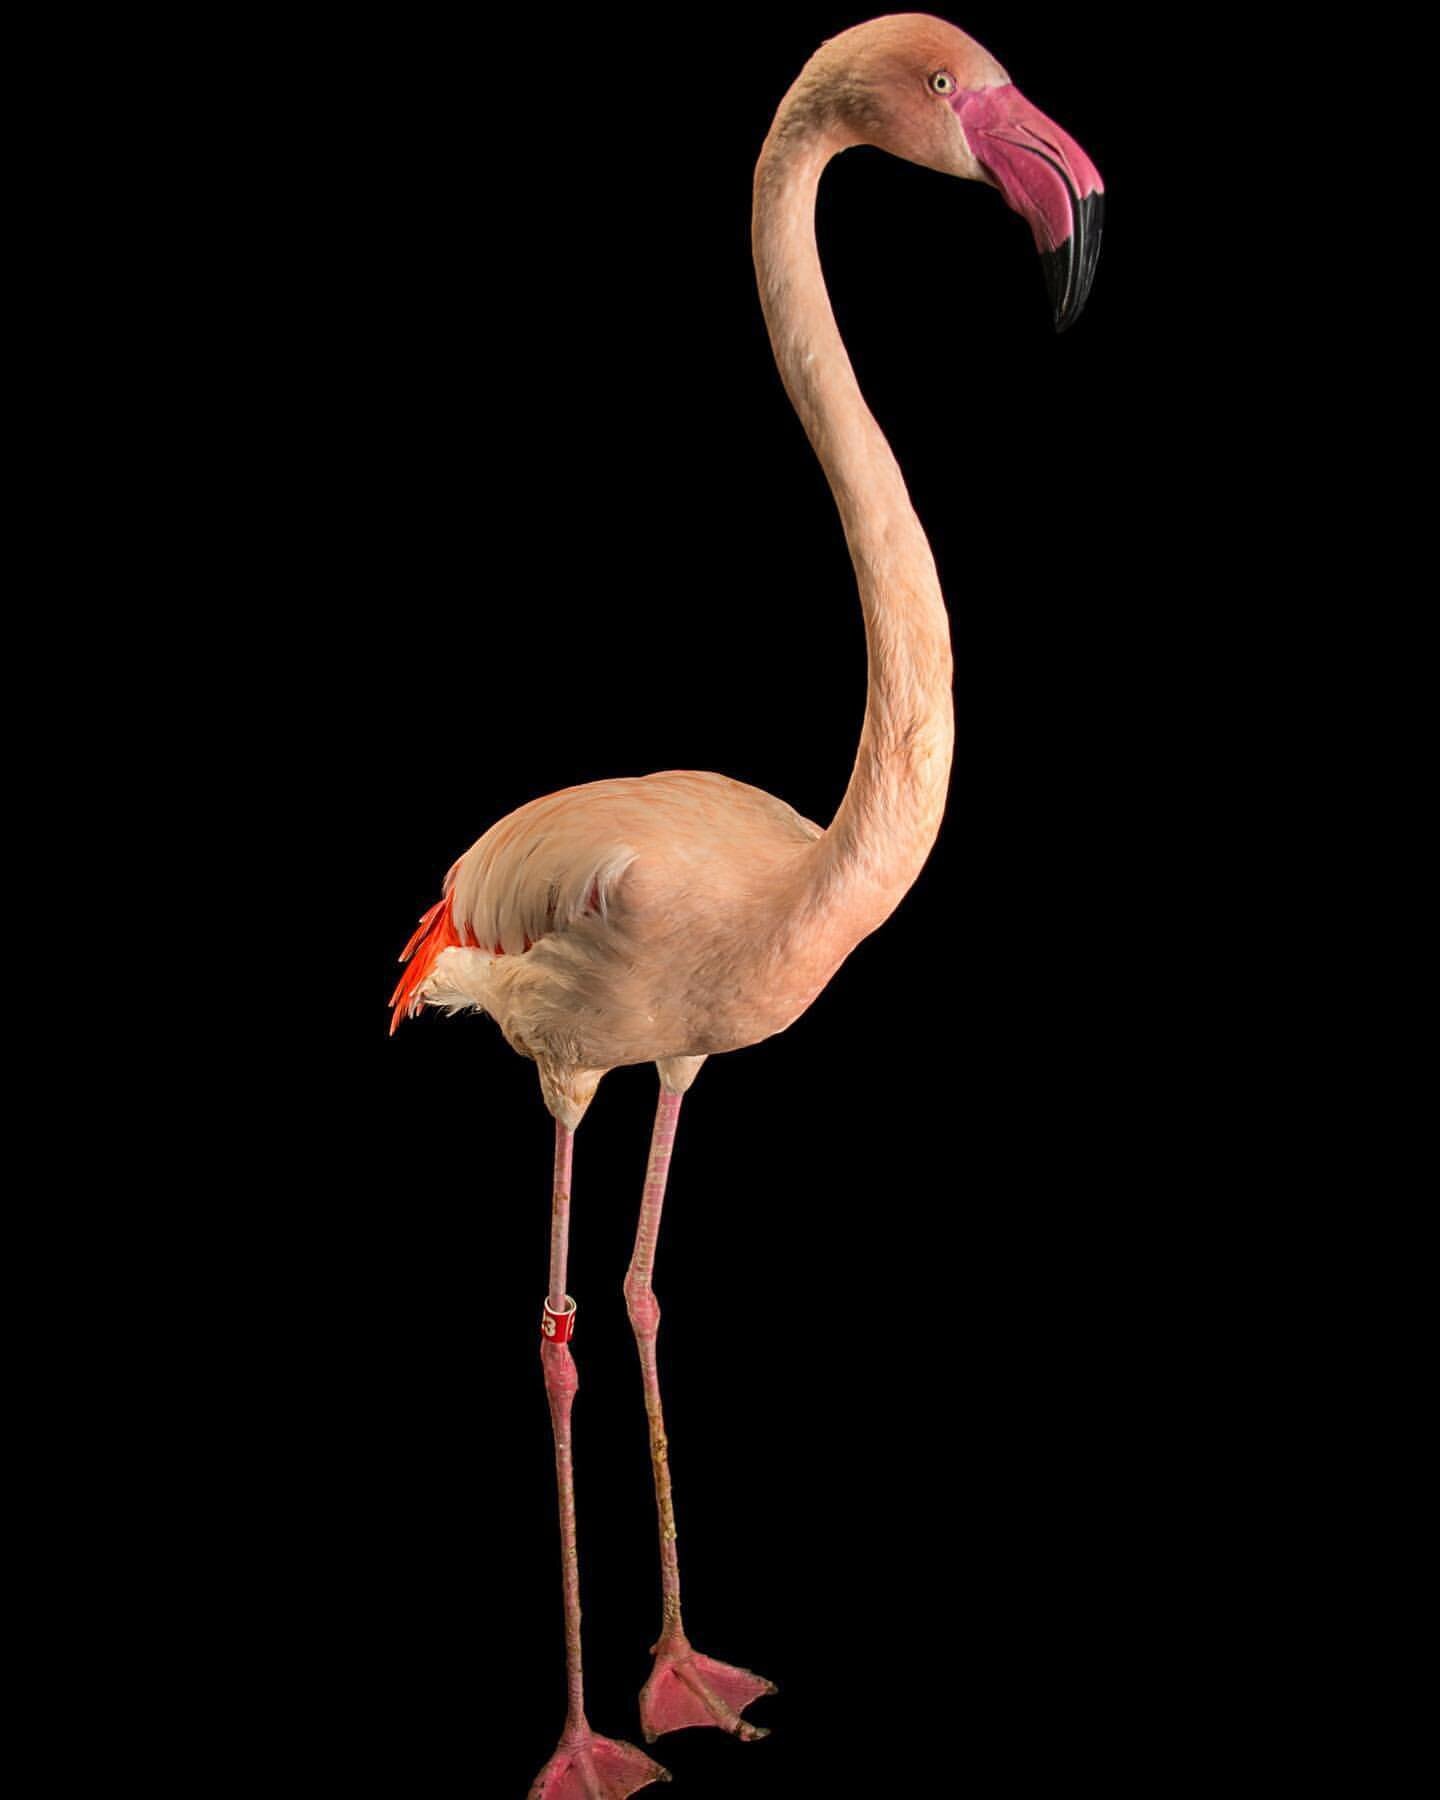 🦩🤍 #regram &bull; @joelsartore Meet Pauly, a greater flamingo @lazoo. You can help to protect these famous pink birds by keeping your distance and refraining from driving vehicles in areas where breeding colonies have been established. Keeping the 